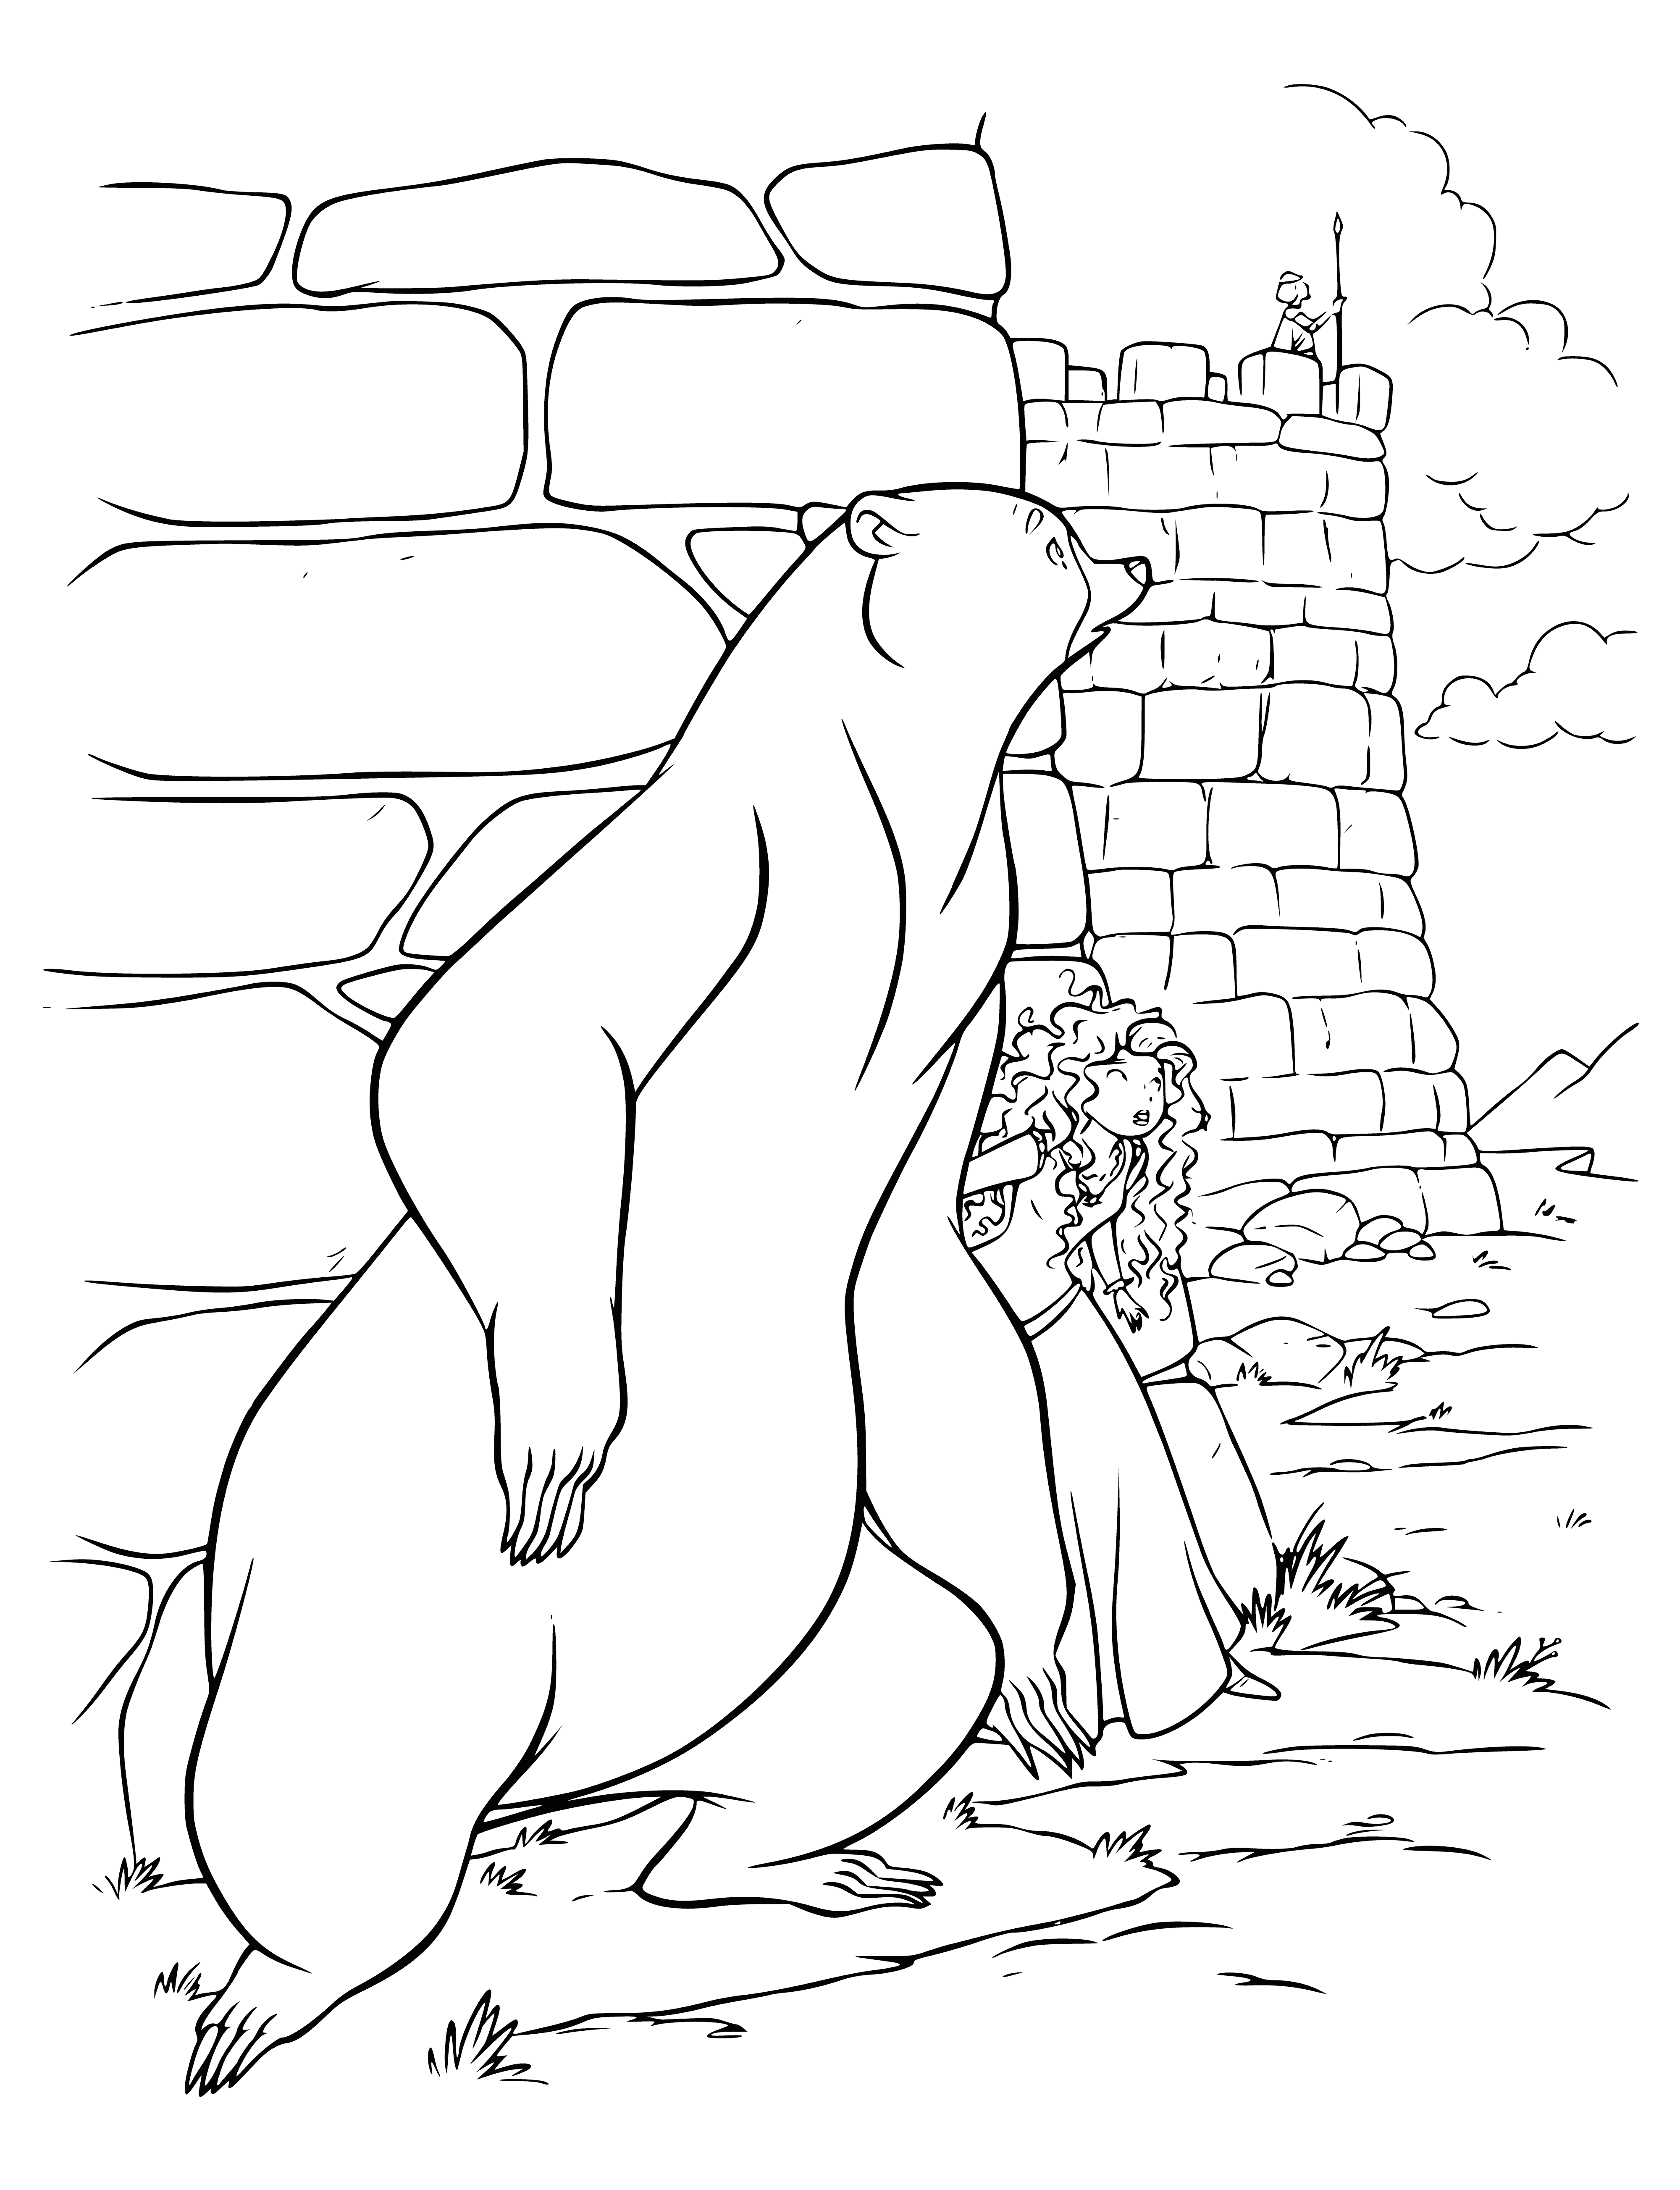 The bear queen and princess Merida are in hiding coloring page